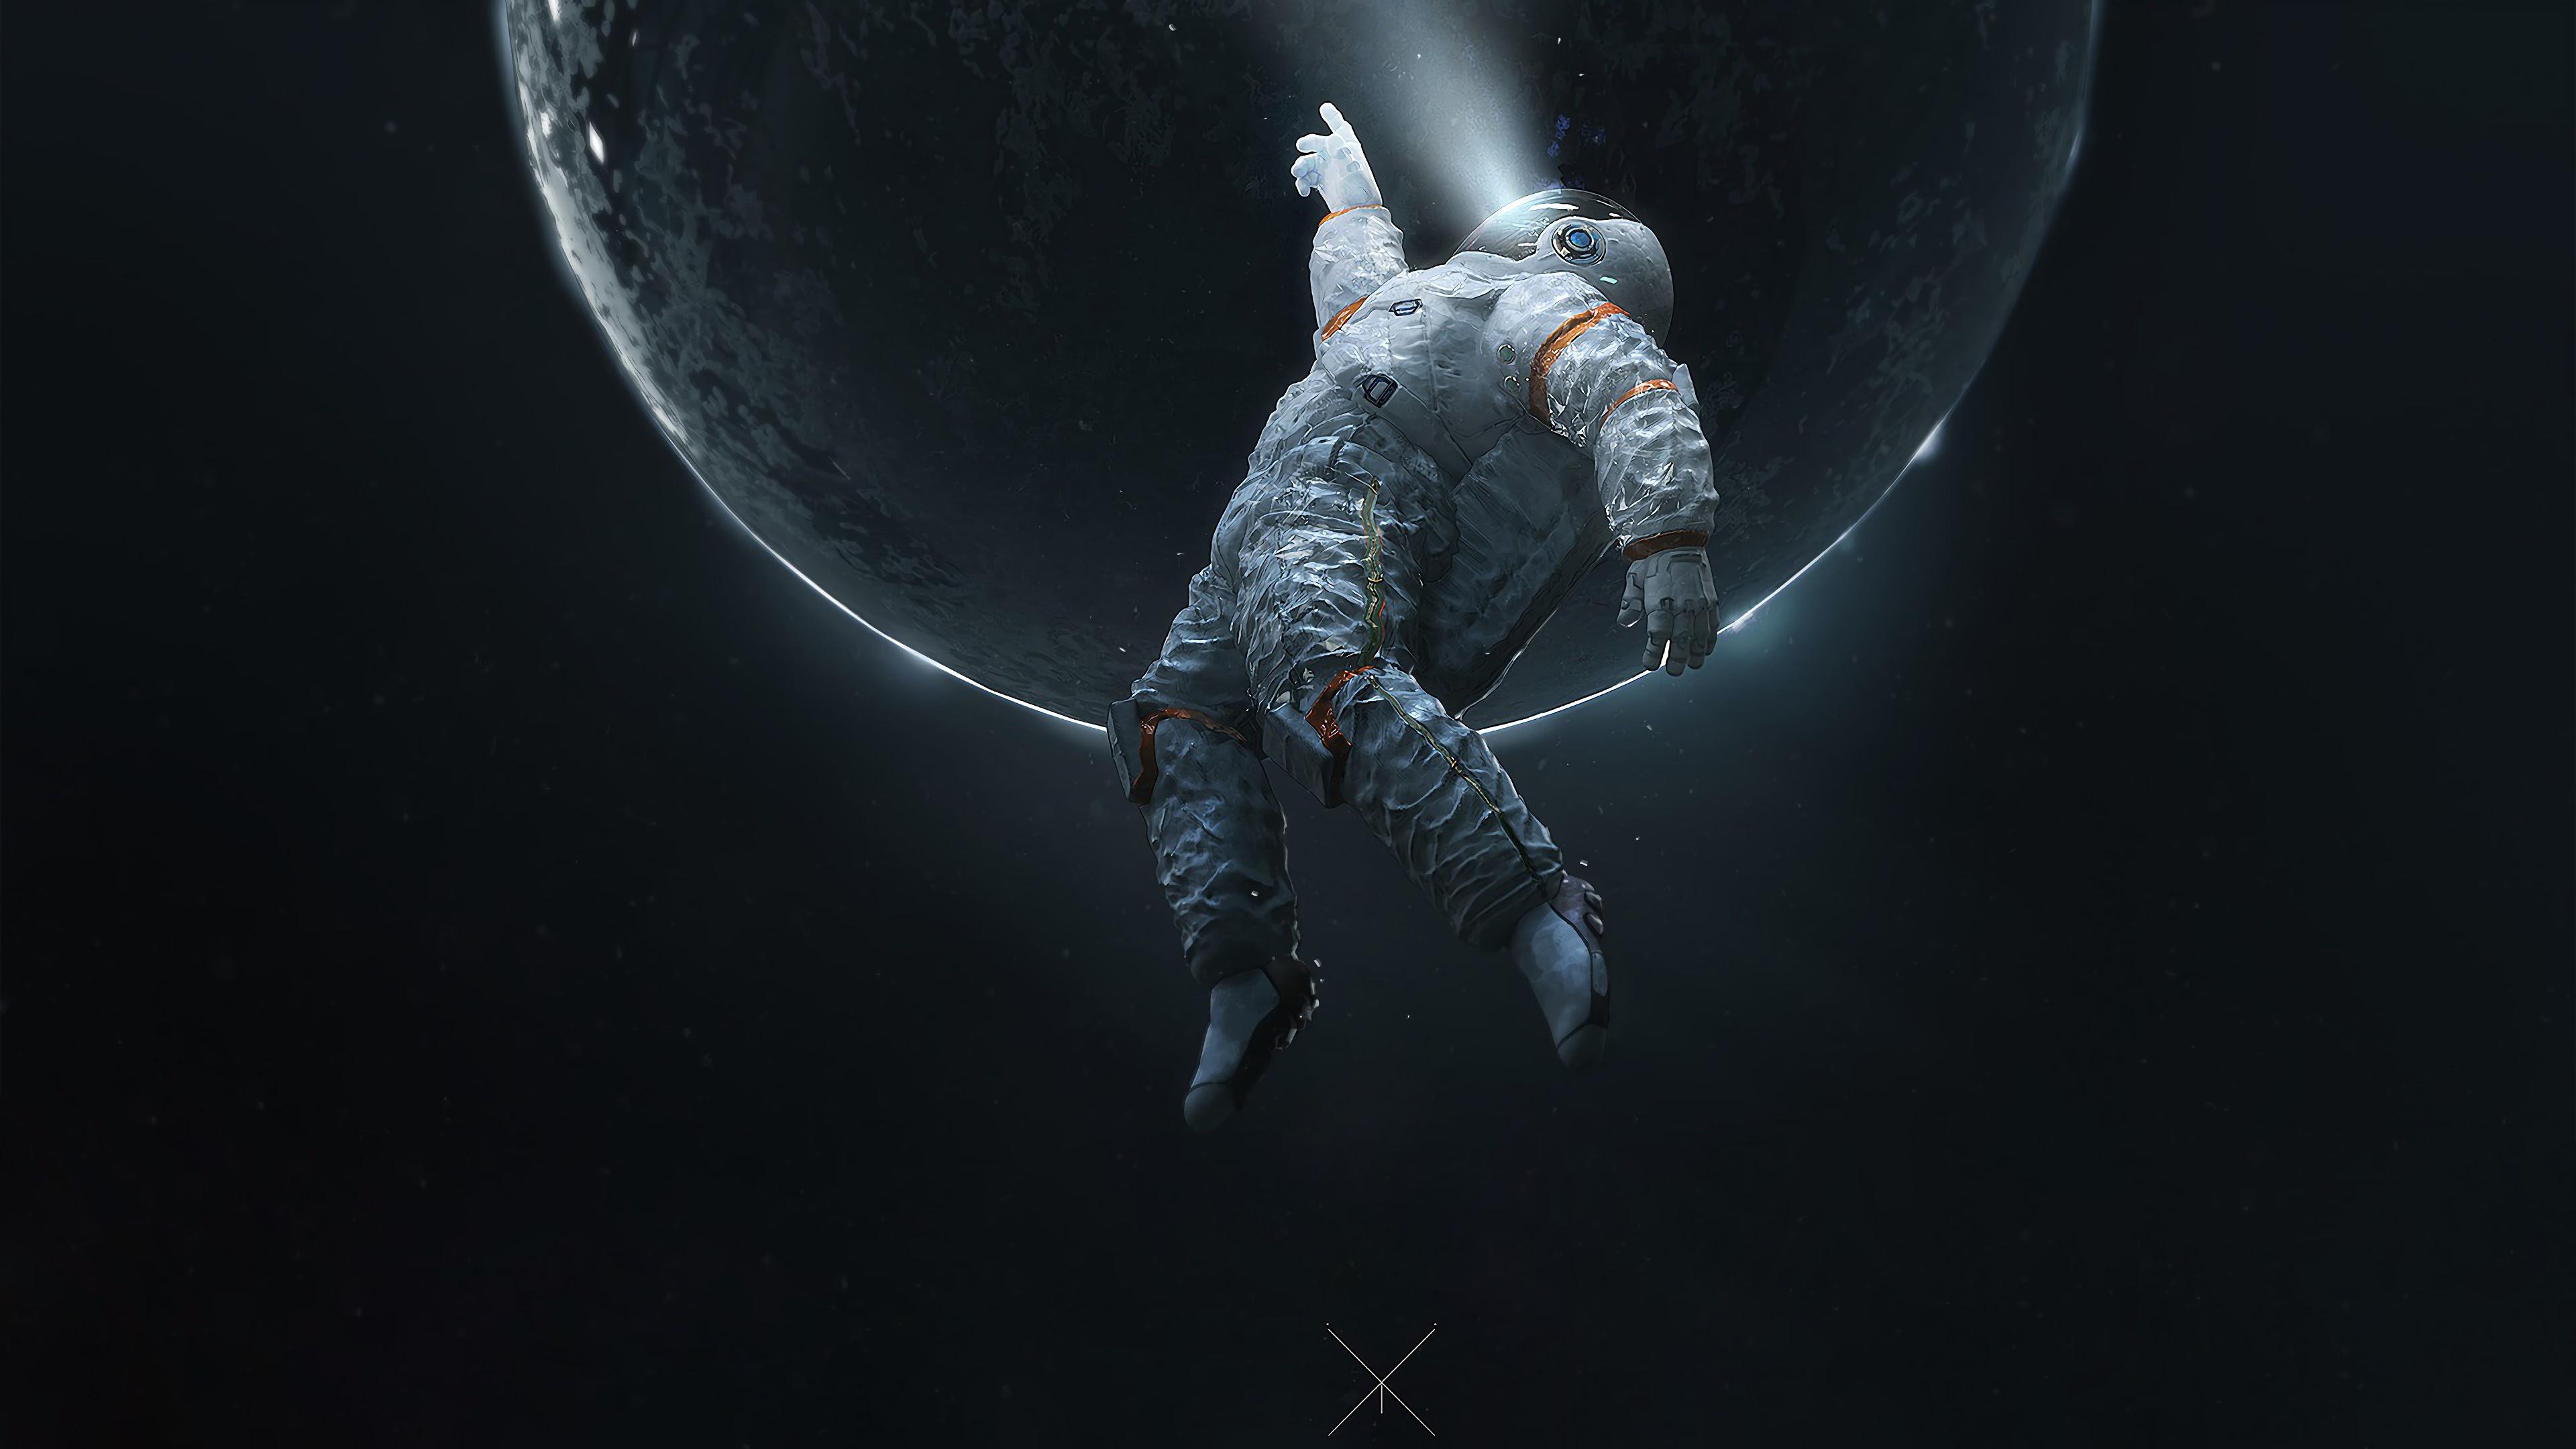 Astronaut 4K wallpapers for your desktop or mobile screen free and easy